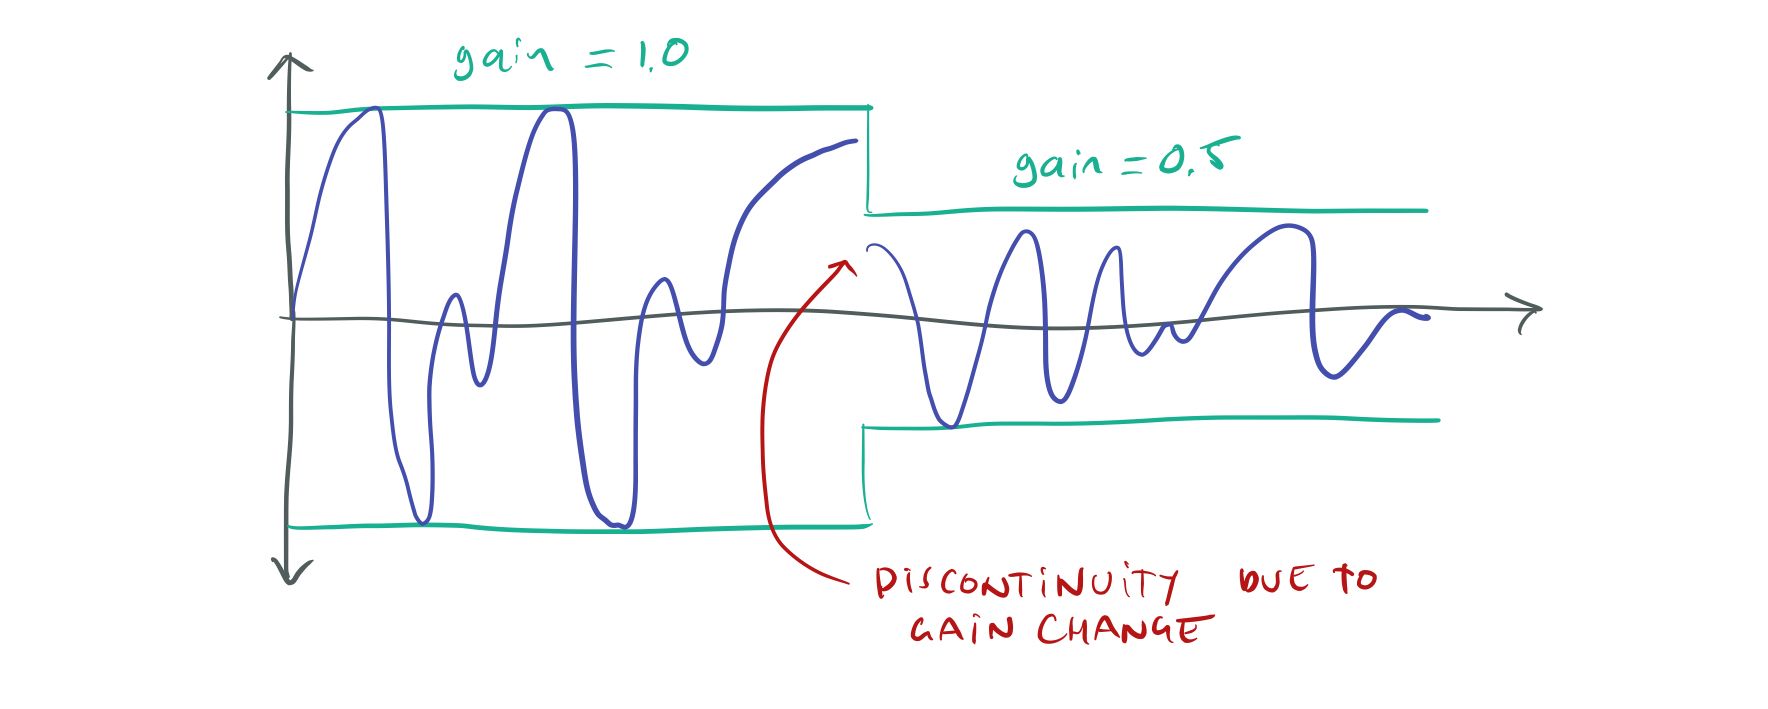 Instant volume changes cause discontinuities.